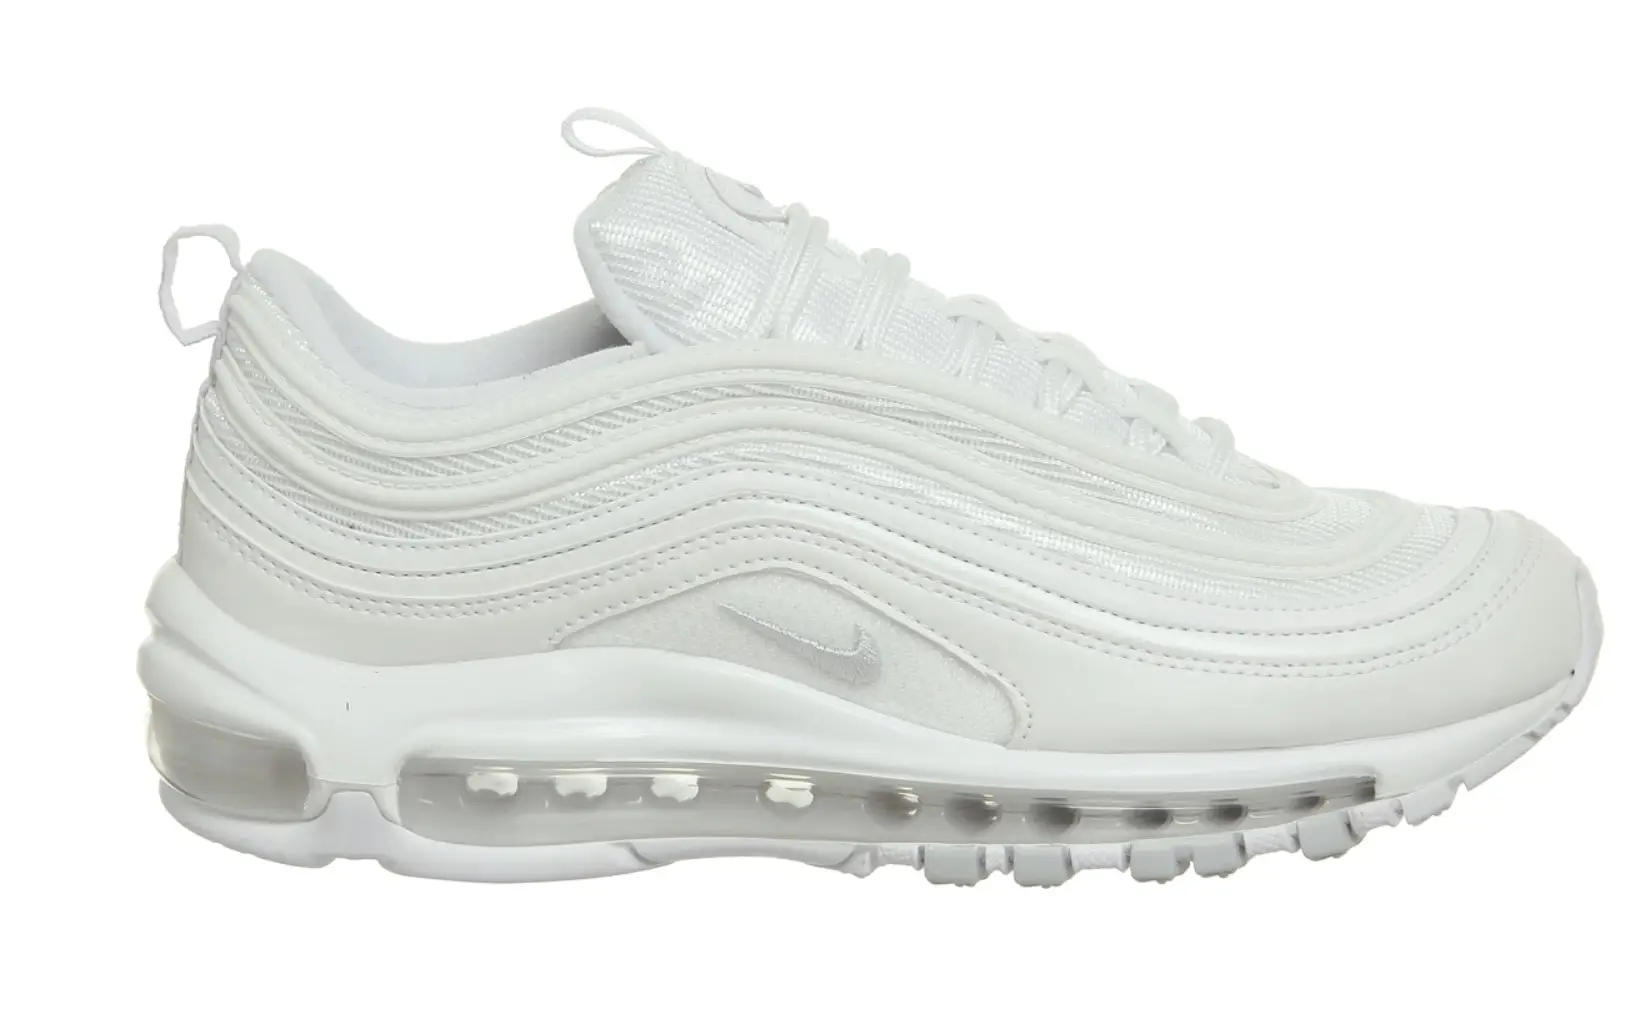 These Nike Air Max 97 Colourways Are The Most Minimal Yet | The Sole ...